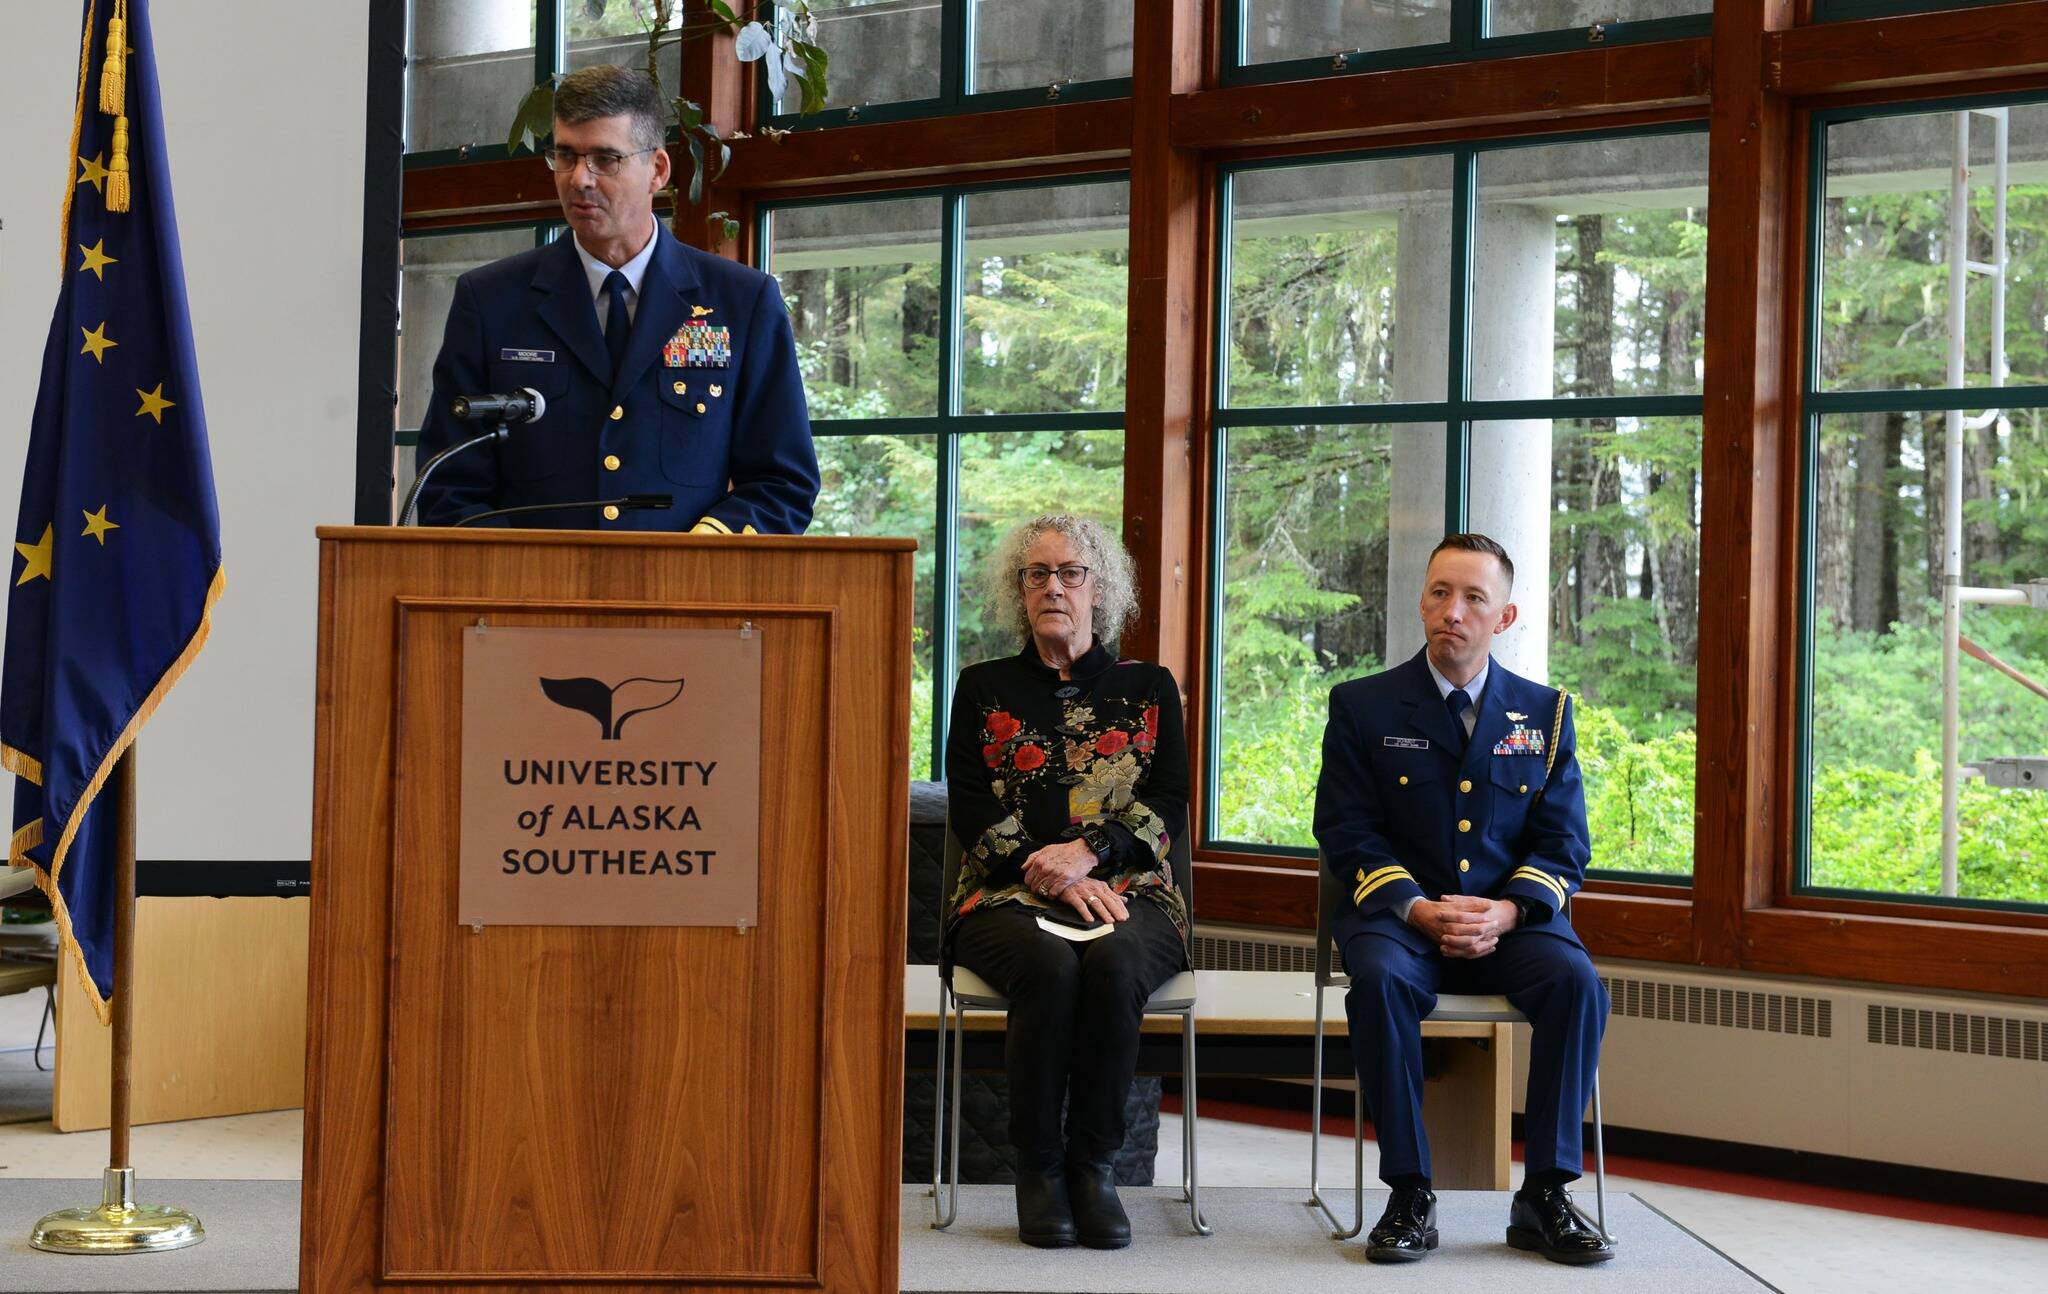 Rear Adm. Nathan Moore, commander of Coast Guard District 17, speaks during a ceremony at University of Alaska Southeast for the renewal of the College Student Pre-Commissioning Initiative on July 25, 2022. (Courtesy photo / USCG)